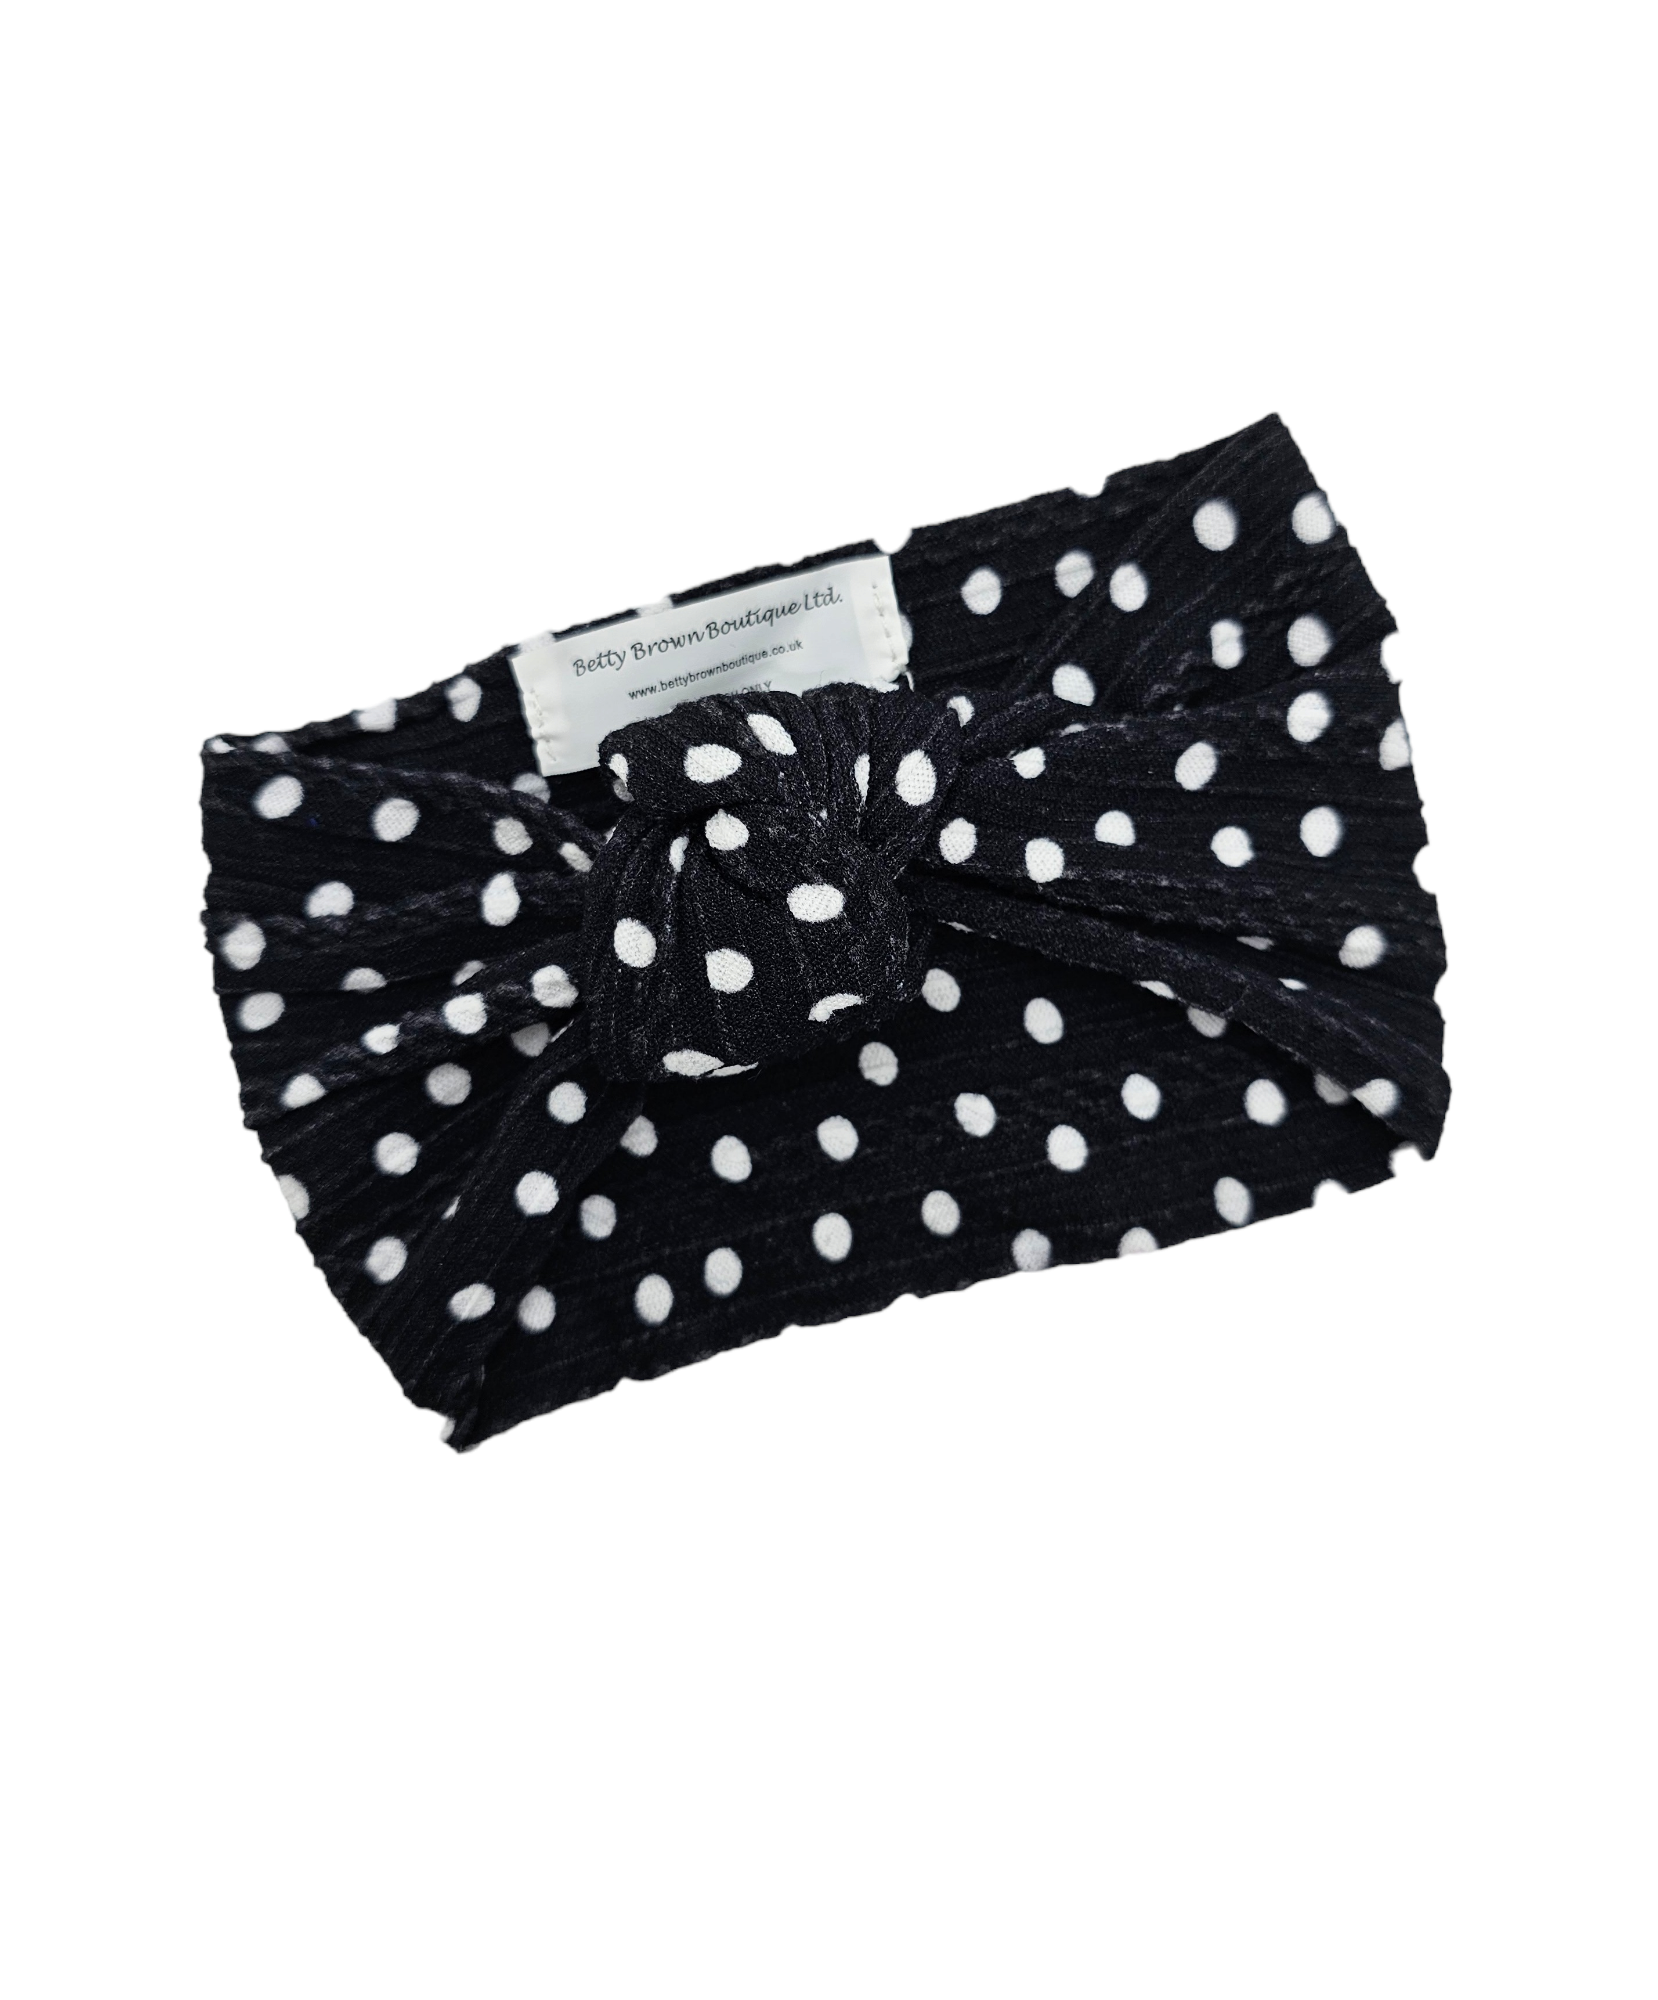 Black and White Polkadot Knot Cable Knit Headwrap - Betty Brown Boutique Ltd